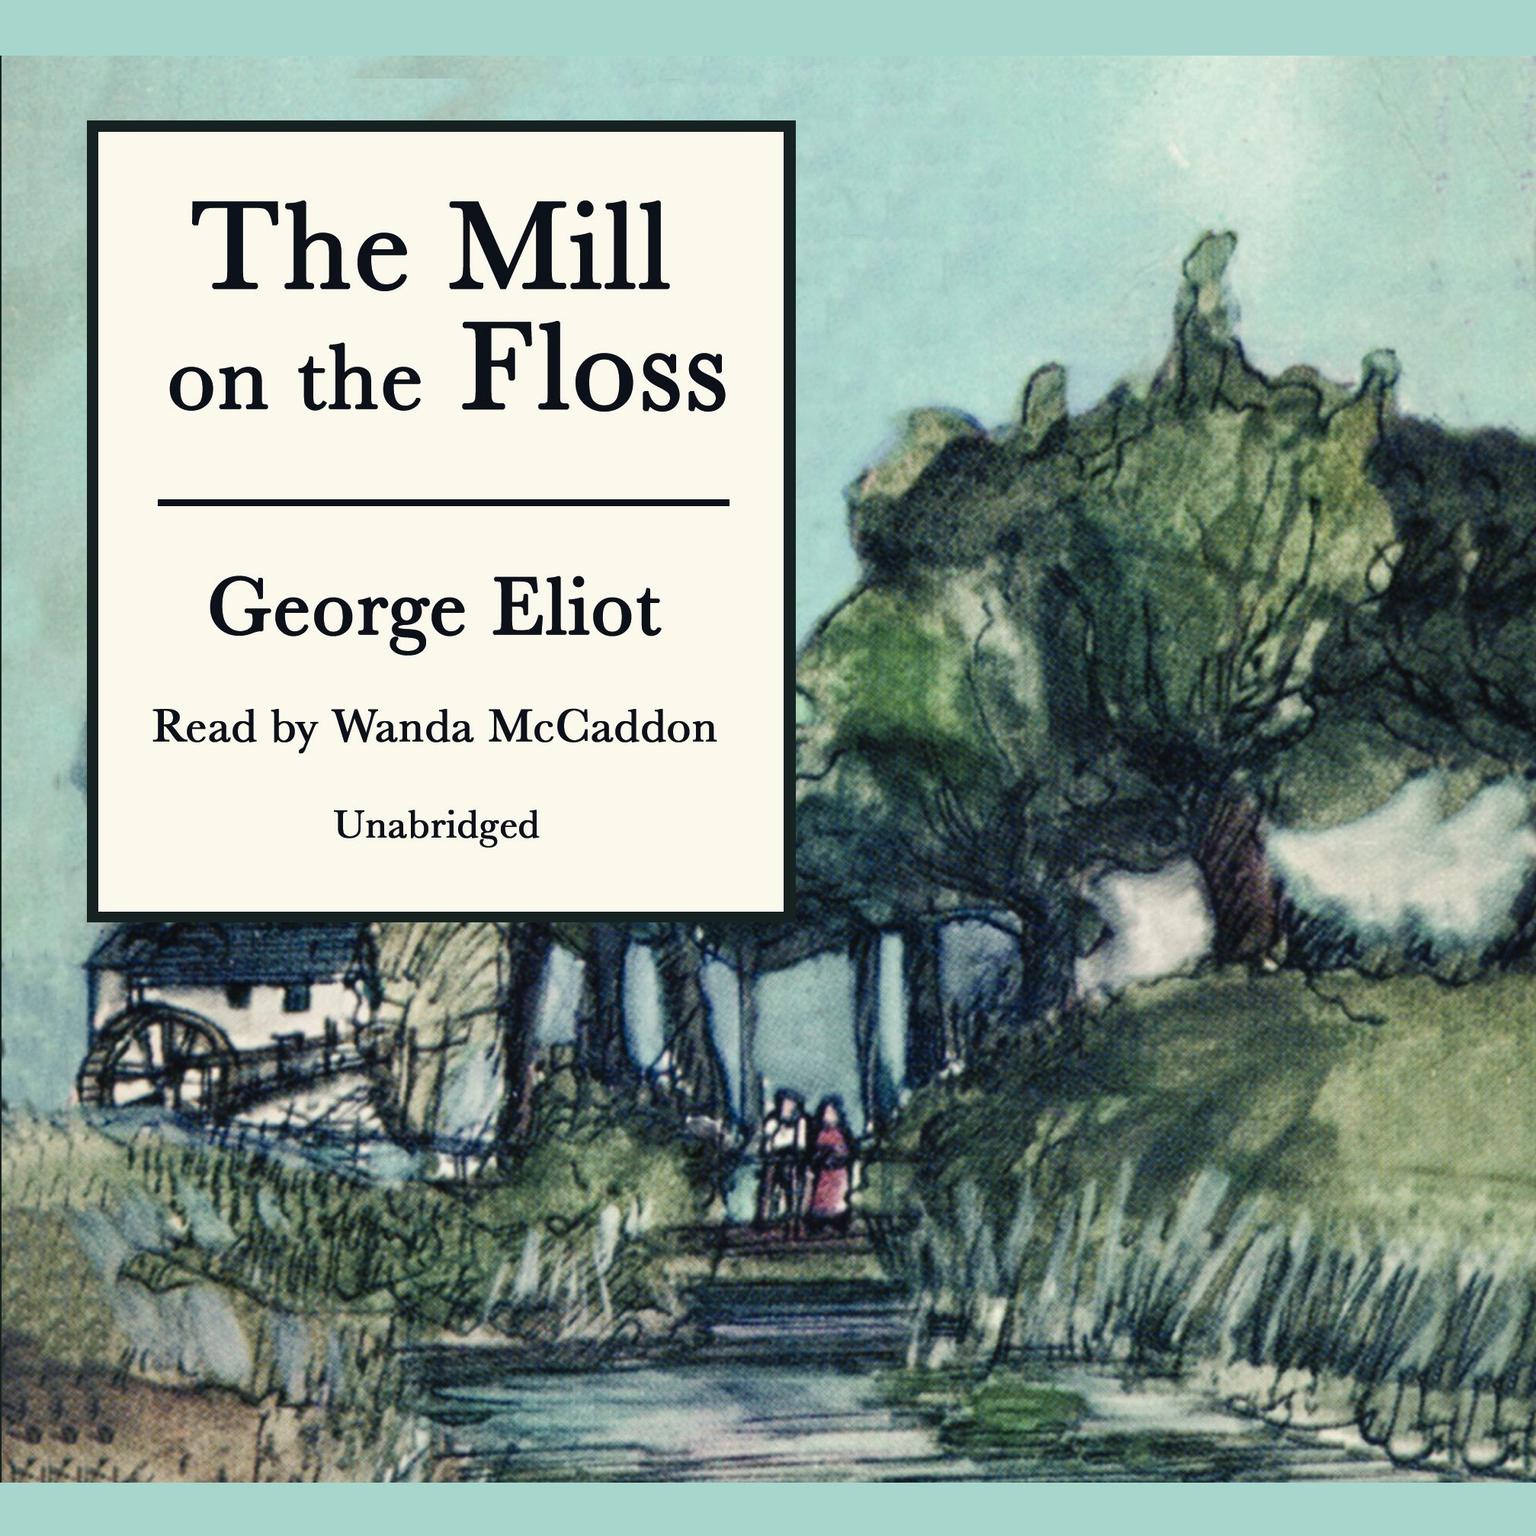 The Mill on the Floss Audiobook, by George Eliot